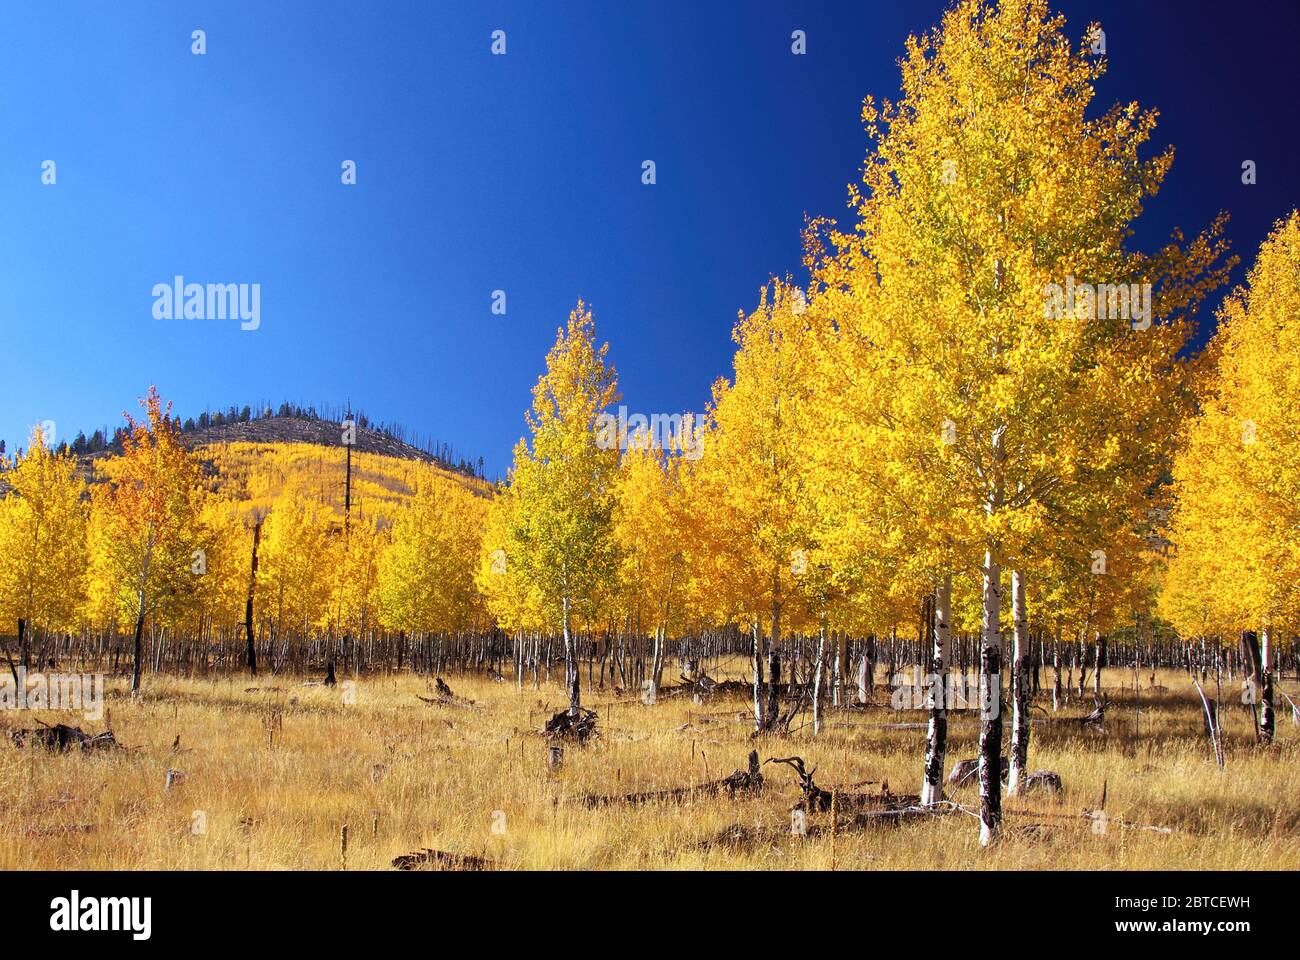 Fall color on quaking aspens, Hochderffer Hills, Coconino National Forest, Arizona Stock Photo